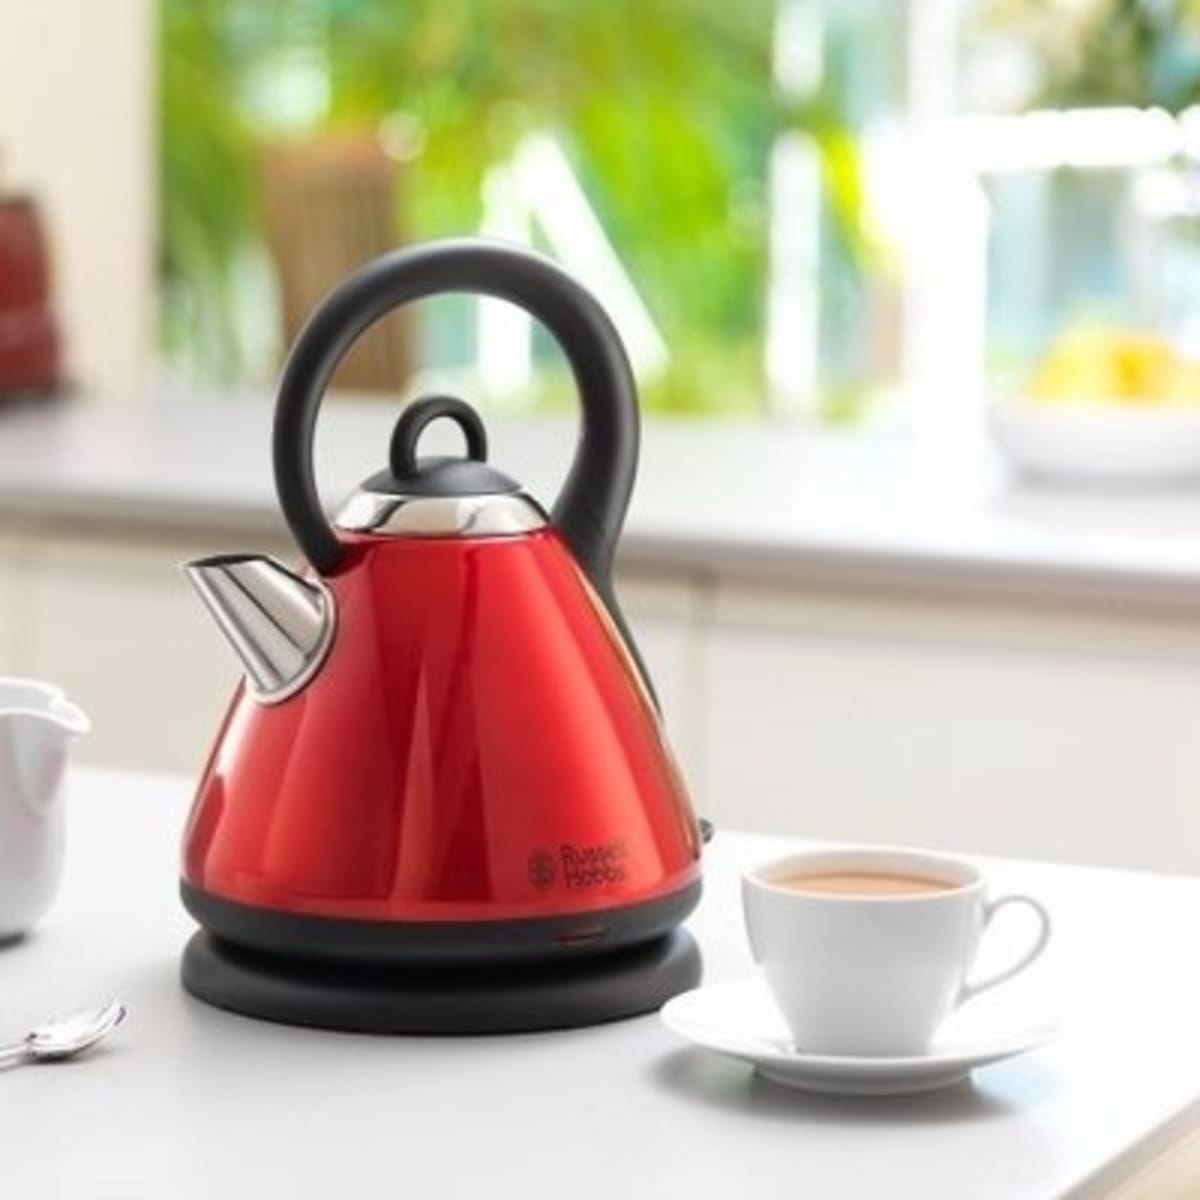 Russell Hobbs Heritage Cordless Kettle - 1.7Litres - Red